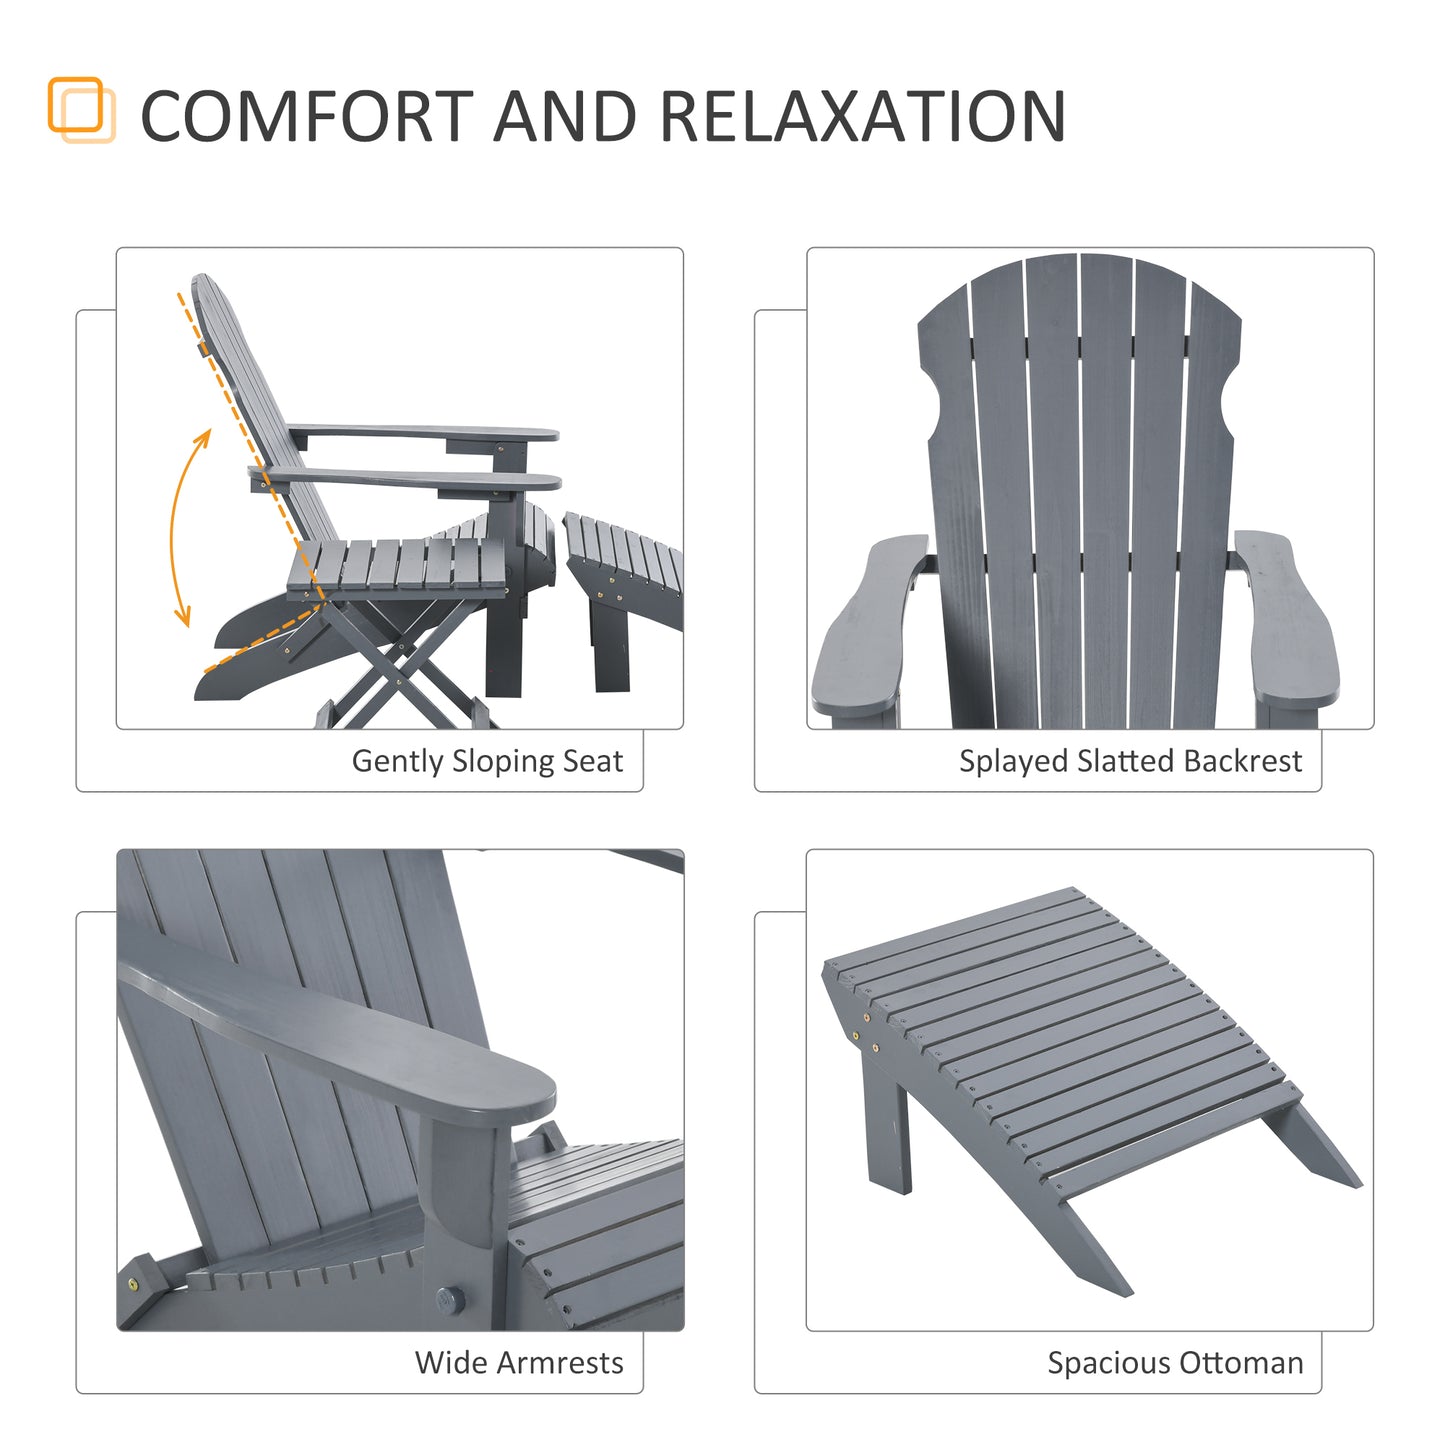 3-Piece Folding Adirondack Chair with Ottoman and Side Table